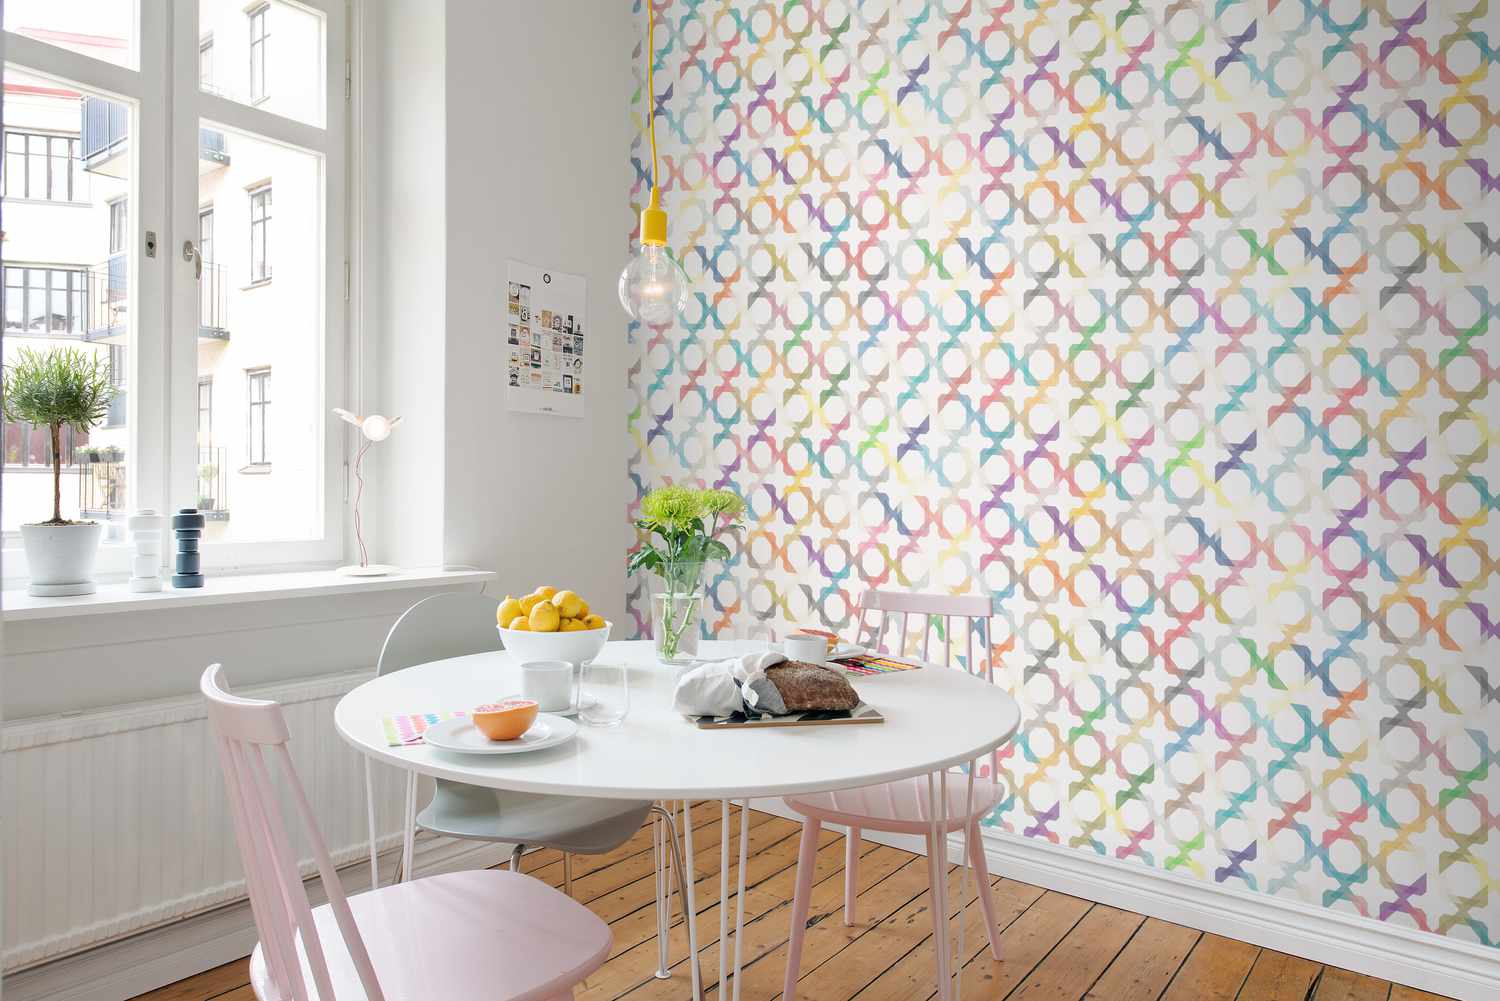 Patchwork Play wallpaper from Rebel Walls.